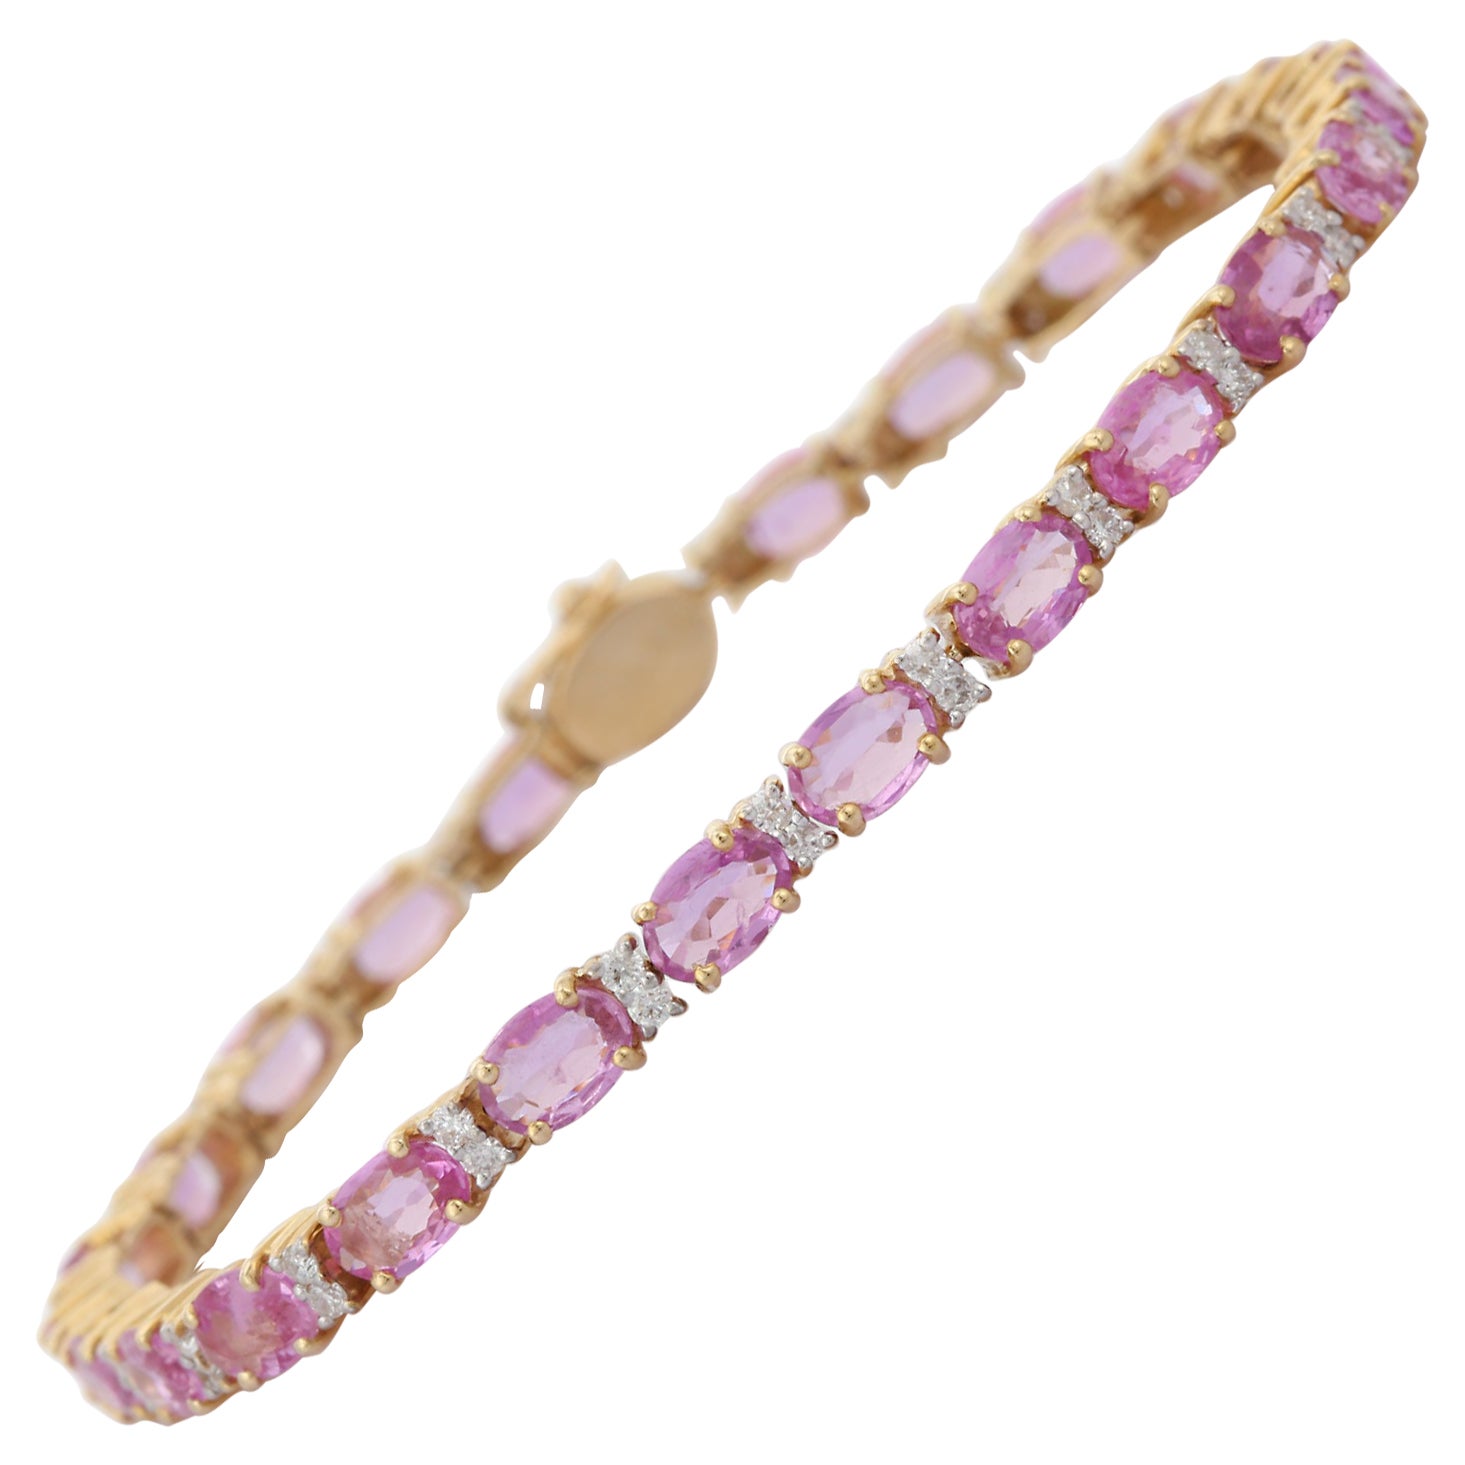 Gemstone Bracelet Featuring Oval Cut Pink Sapphire in 14K Gold With Diamonds